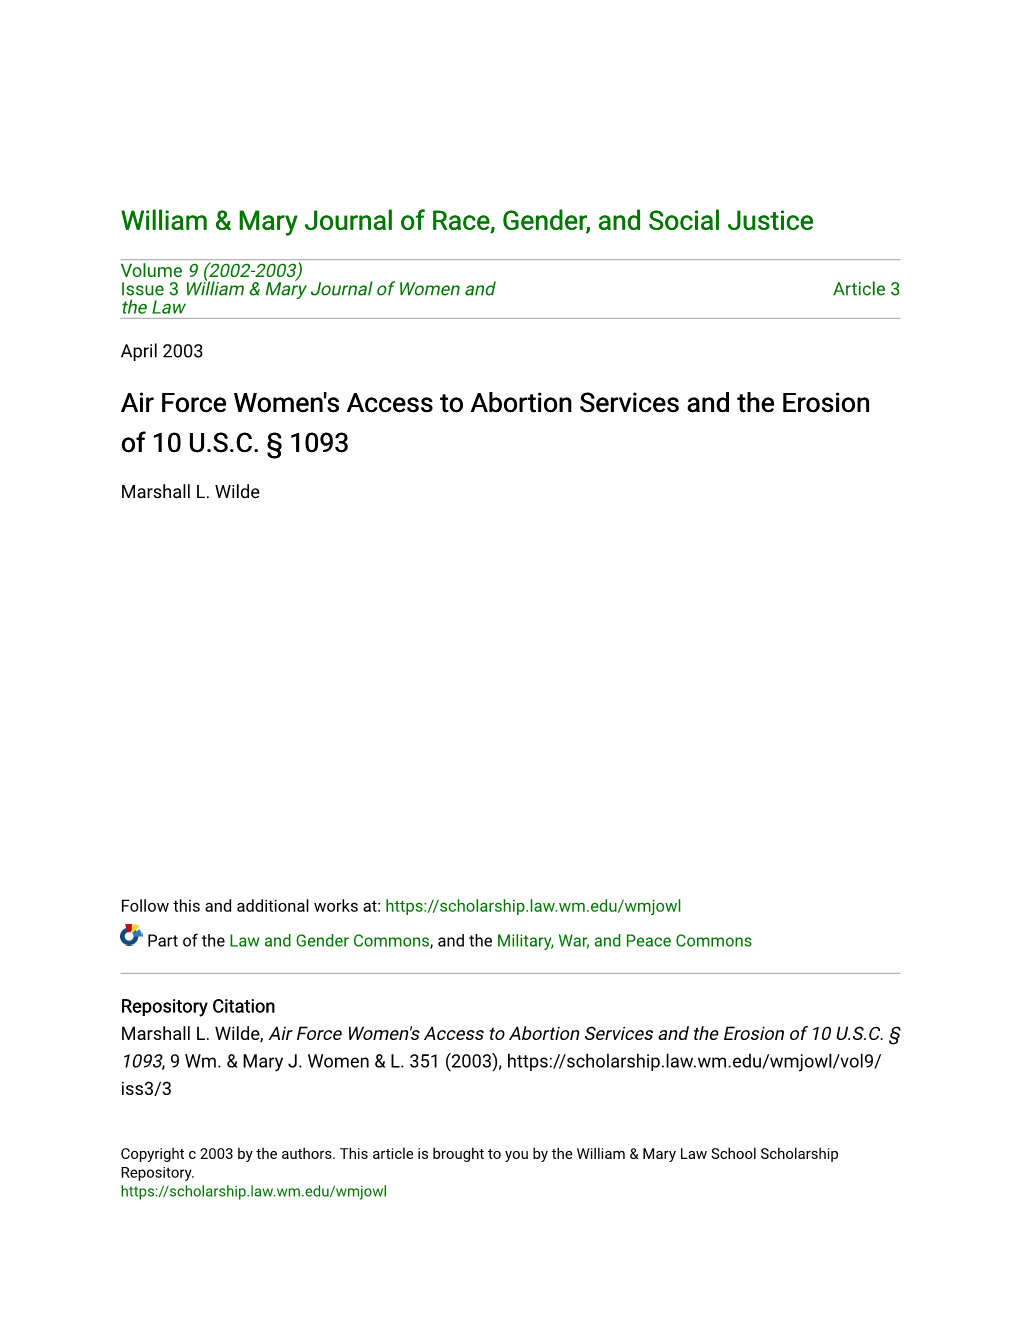 Air Force Women's Access to Abortion Services and the Erosion of 10 U.S.C